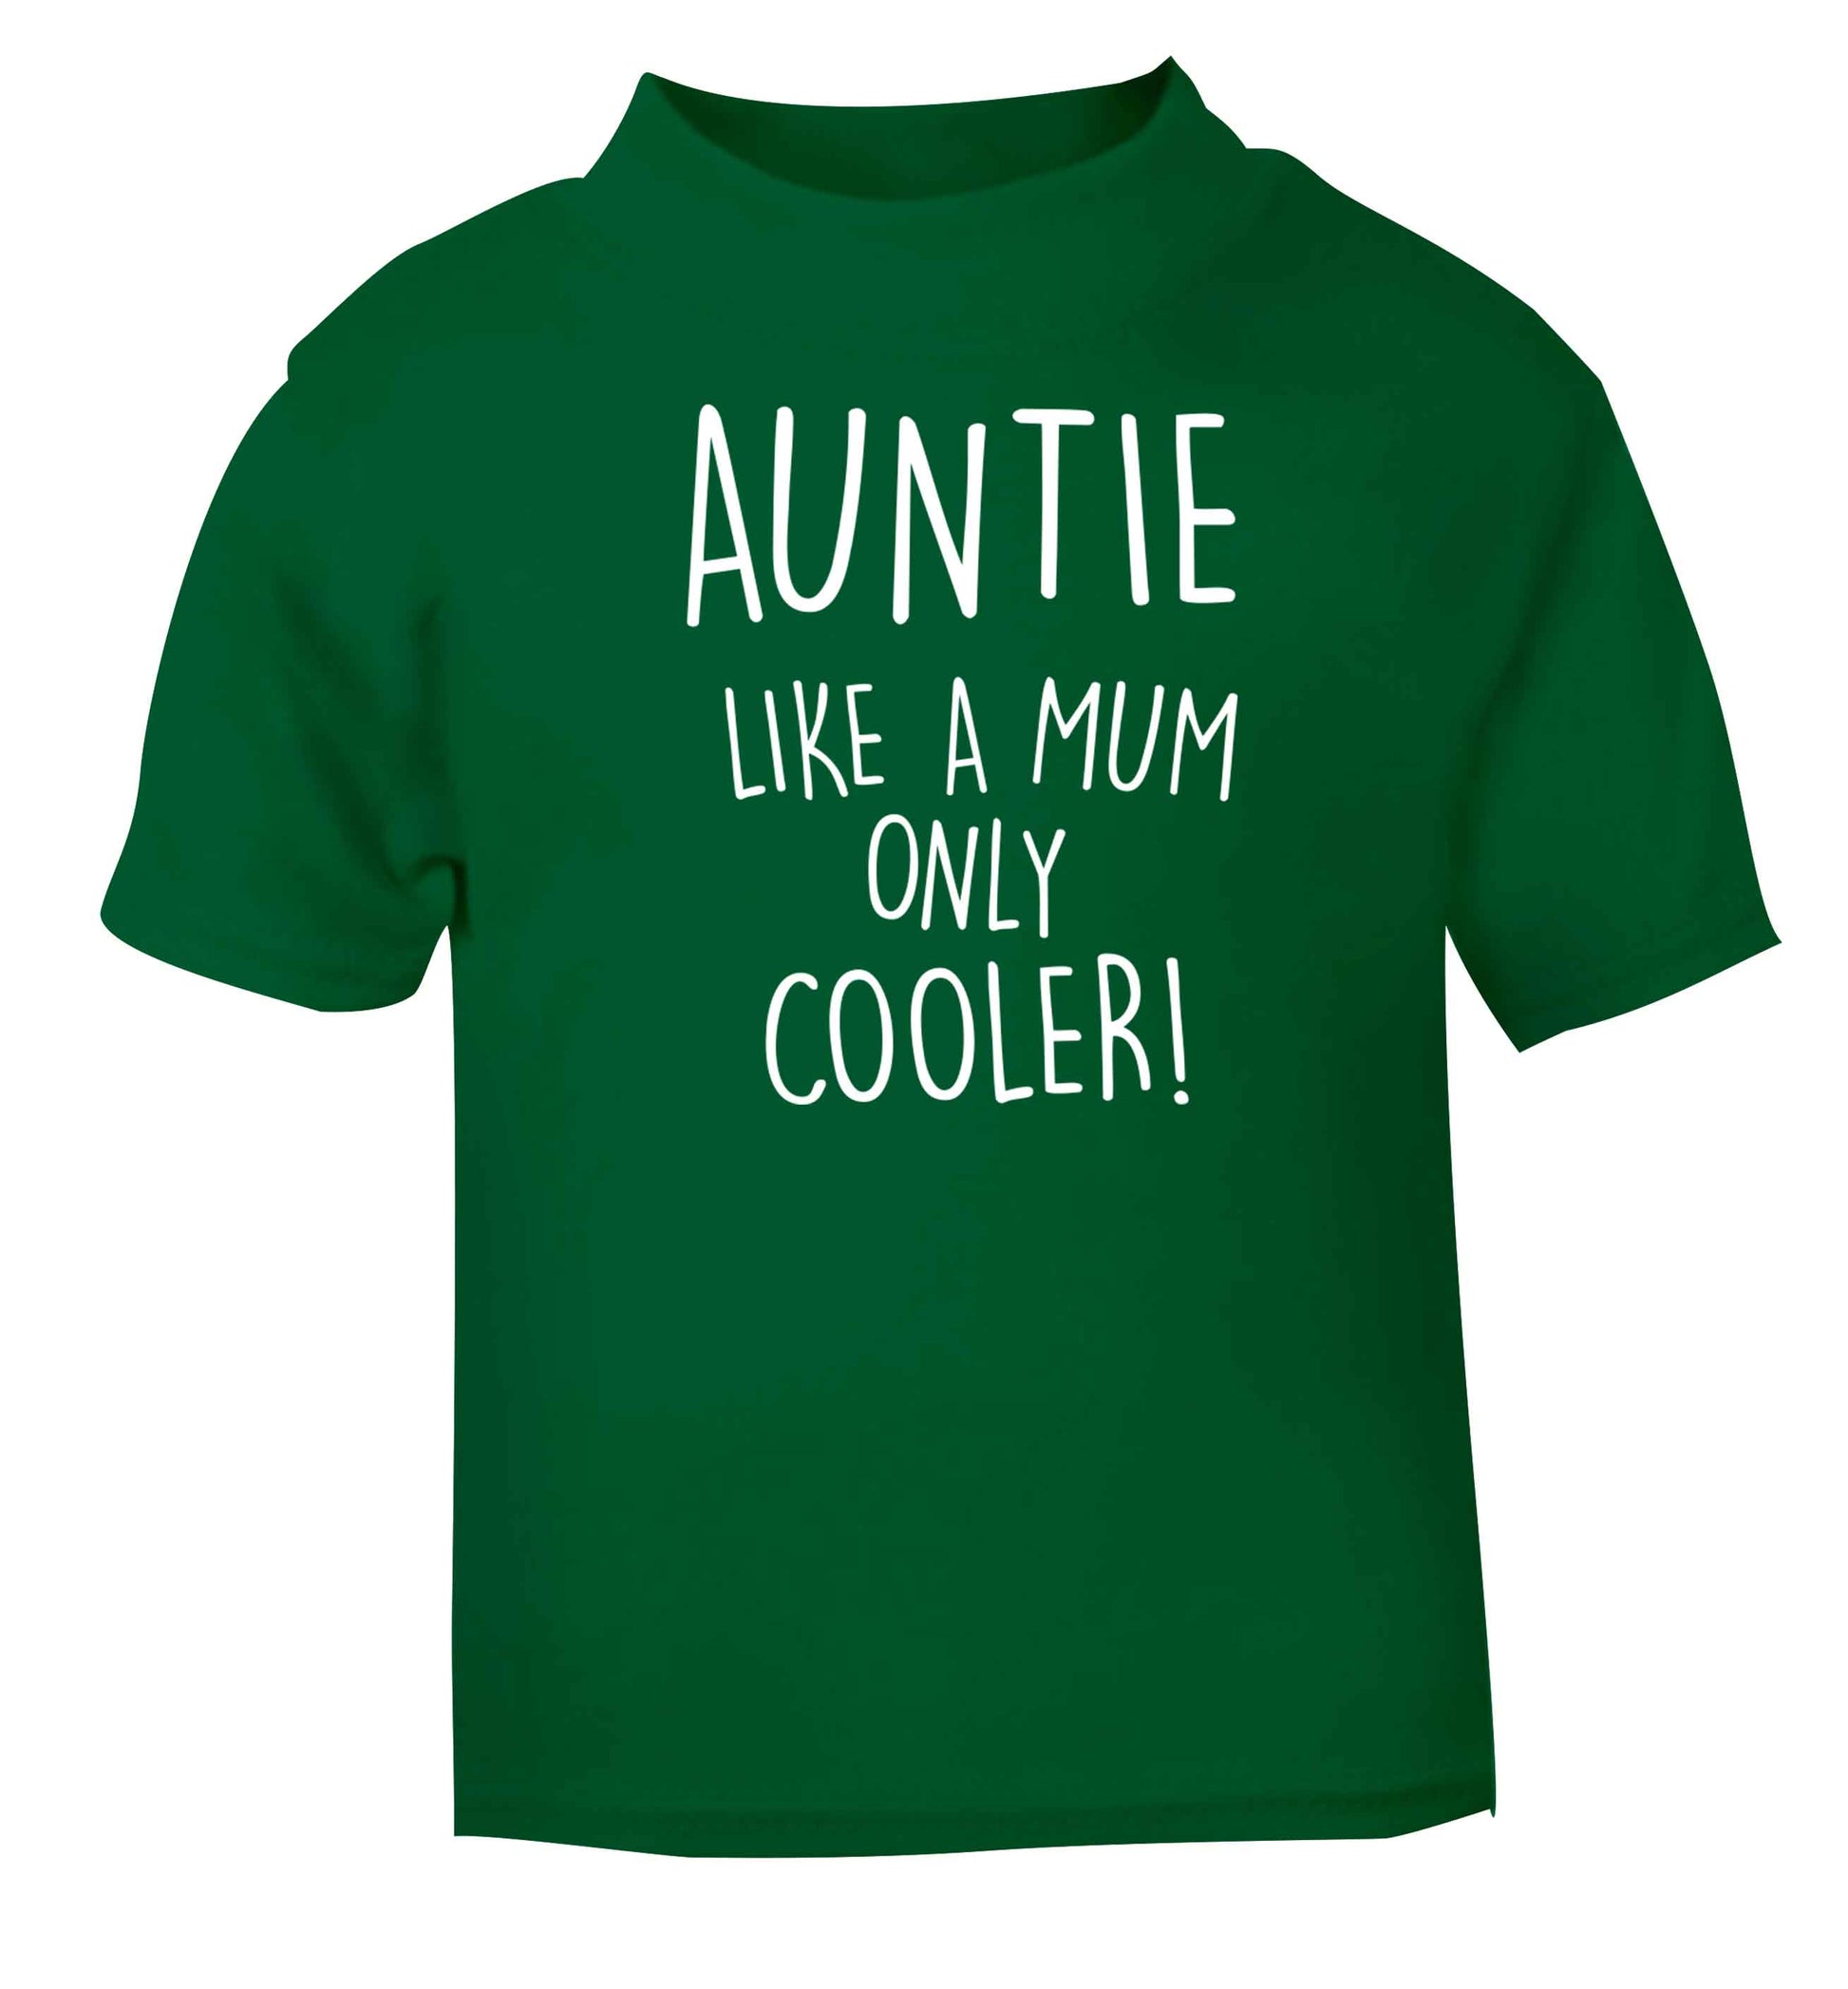 Auntie like a mum only cooler green baby toddler Tshirt 2 Years